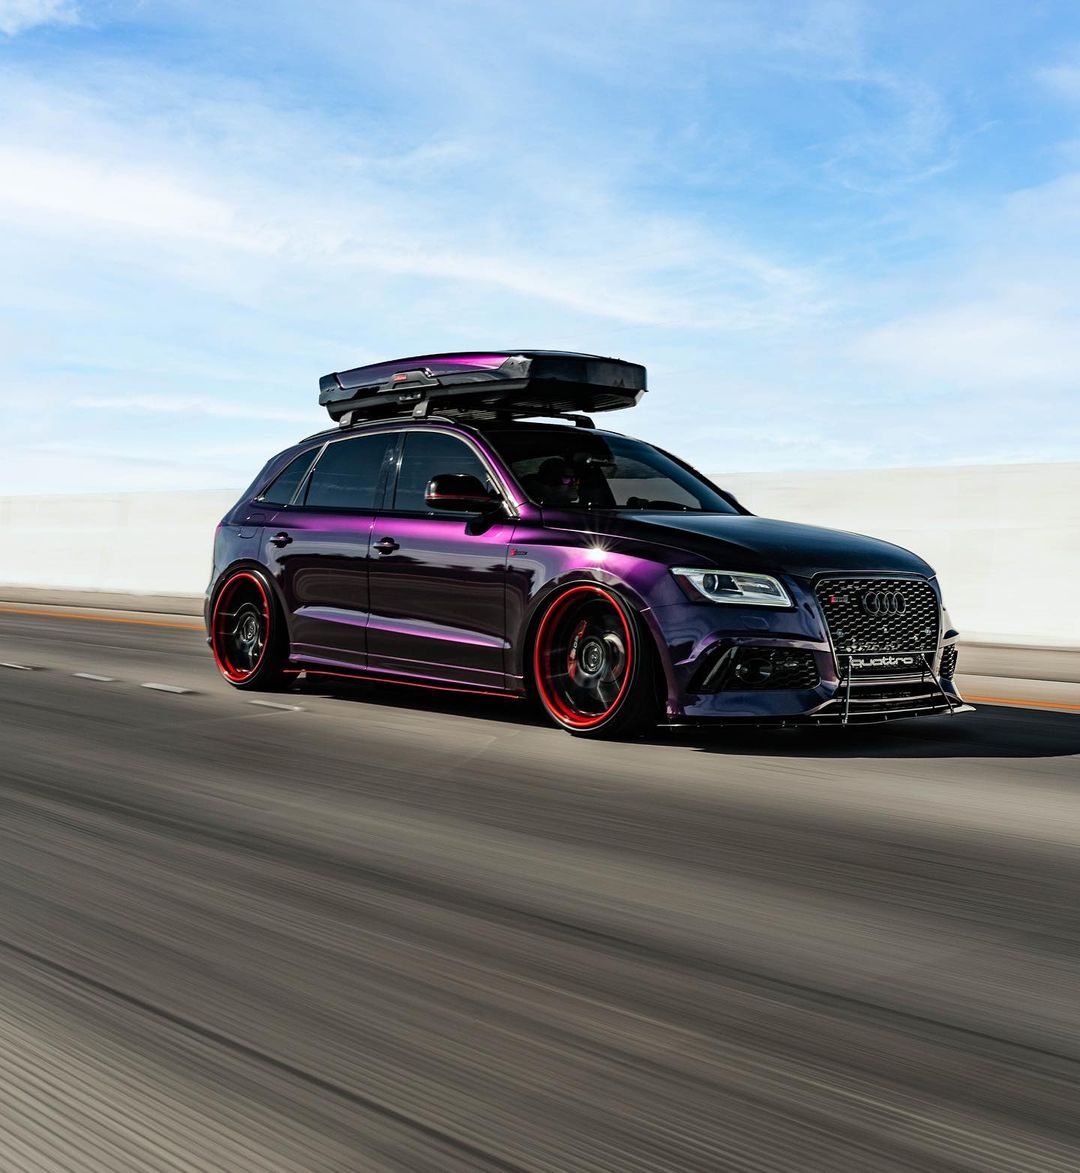 Bagged Audi SQ5 on airlift air suspension